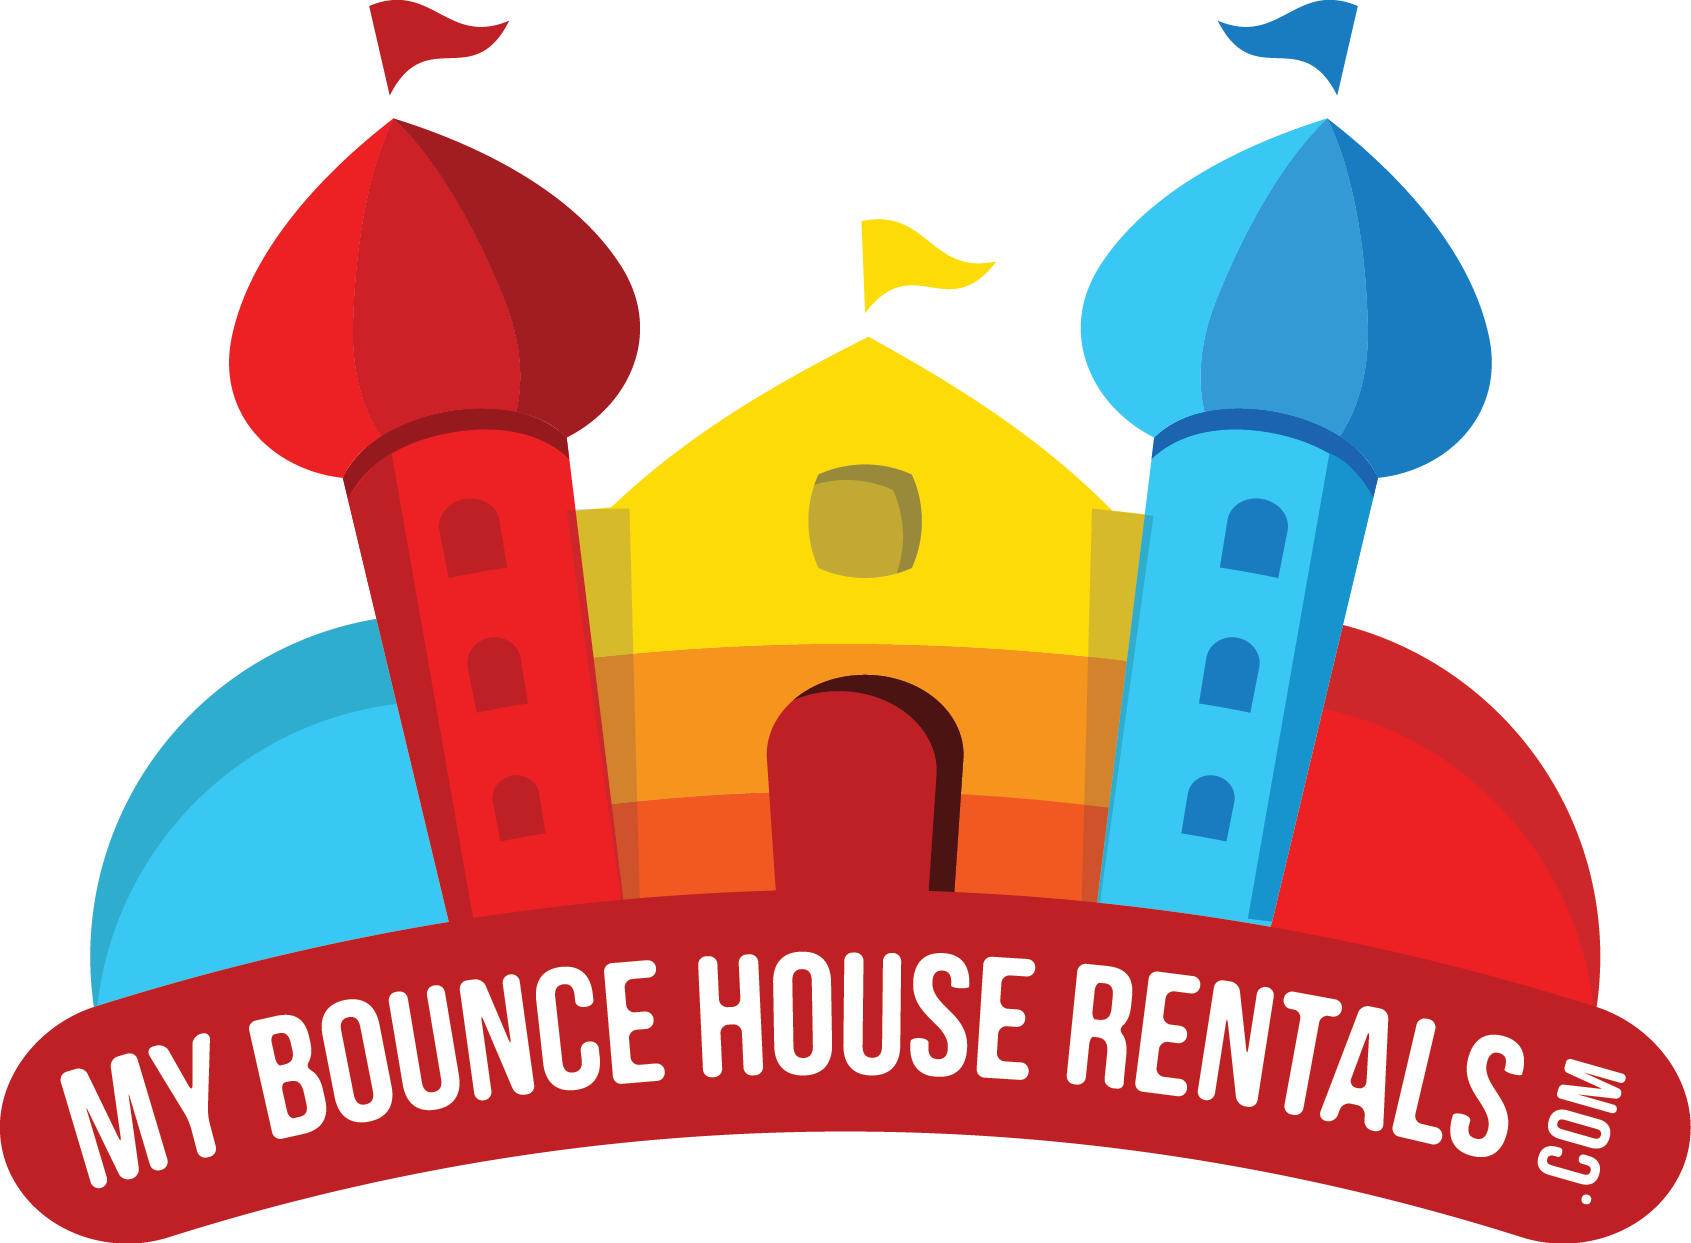 My Bounce House Rentals of Cape Coral